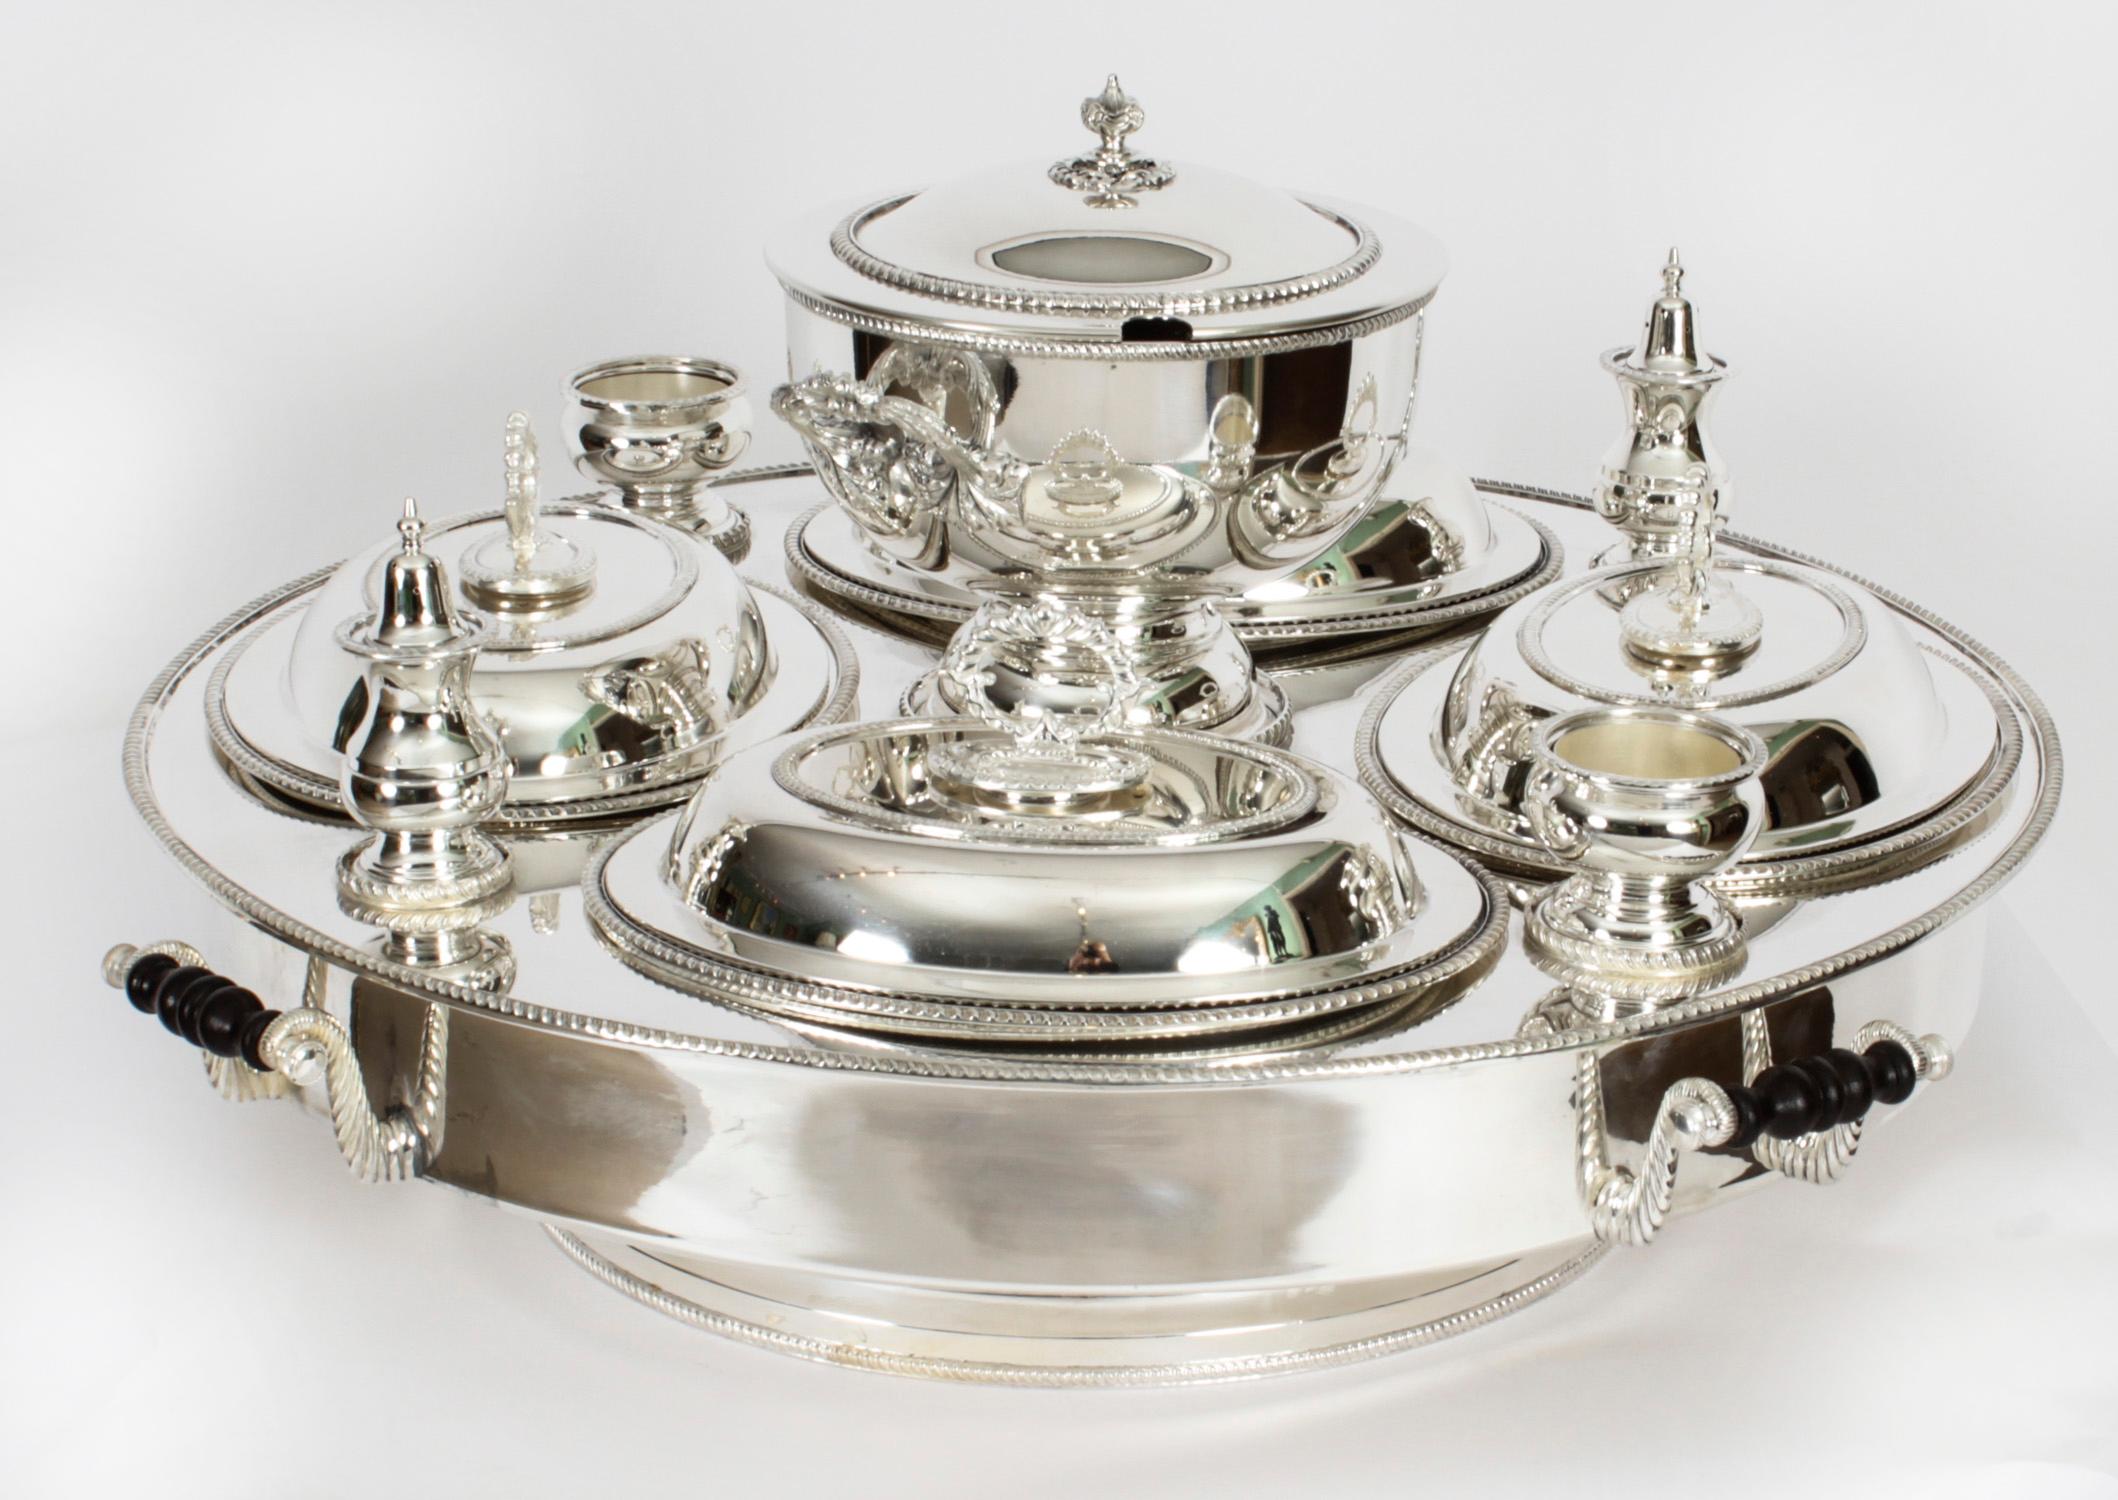 This is a superb English made silver plated 